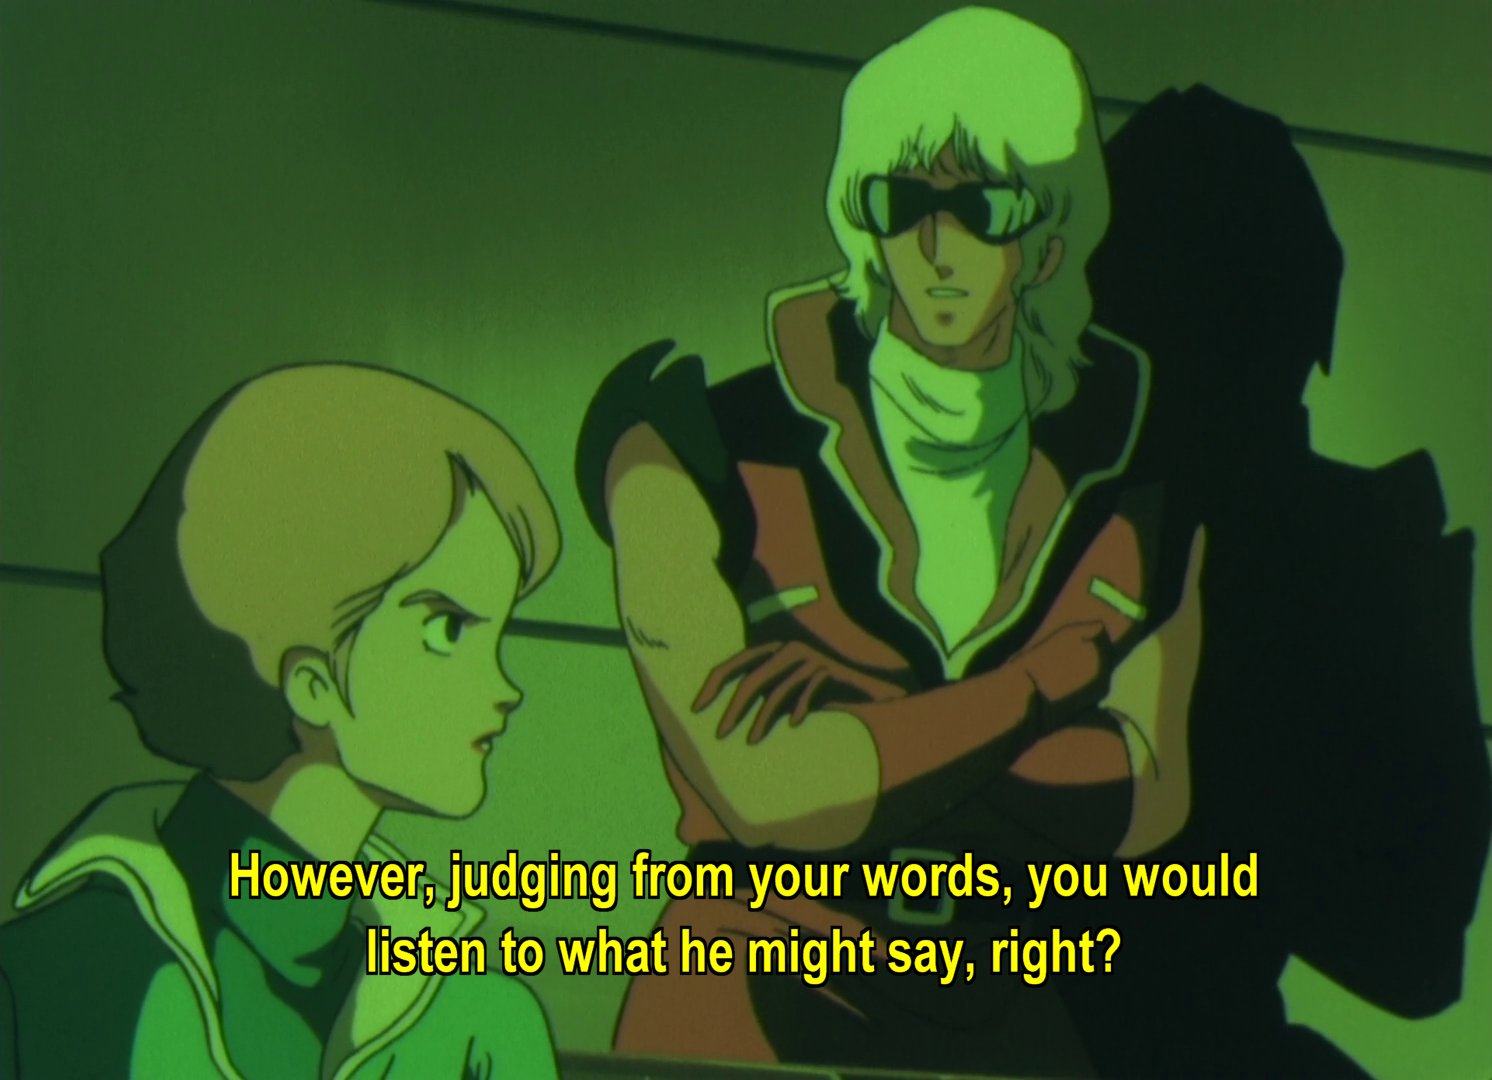 Lt Bajeena leaning against a wall, talking to Reccoa, a woman with short ginger hair.  Subtitles: However, judging from your words, you would listen to what he might say, right?